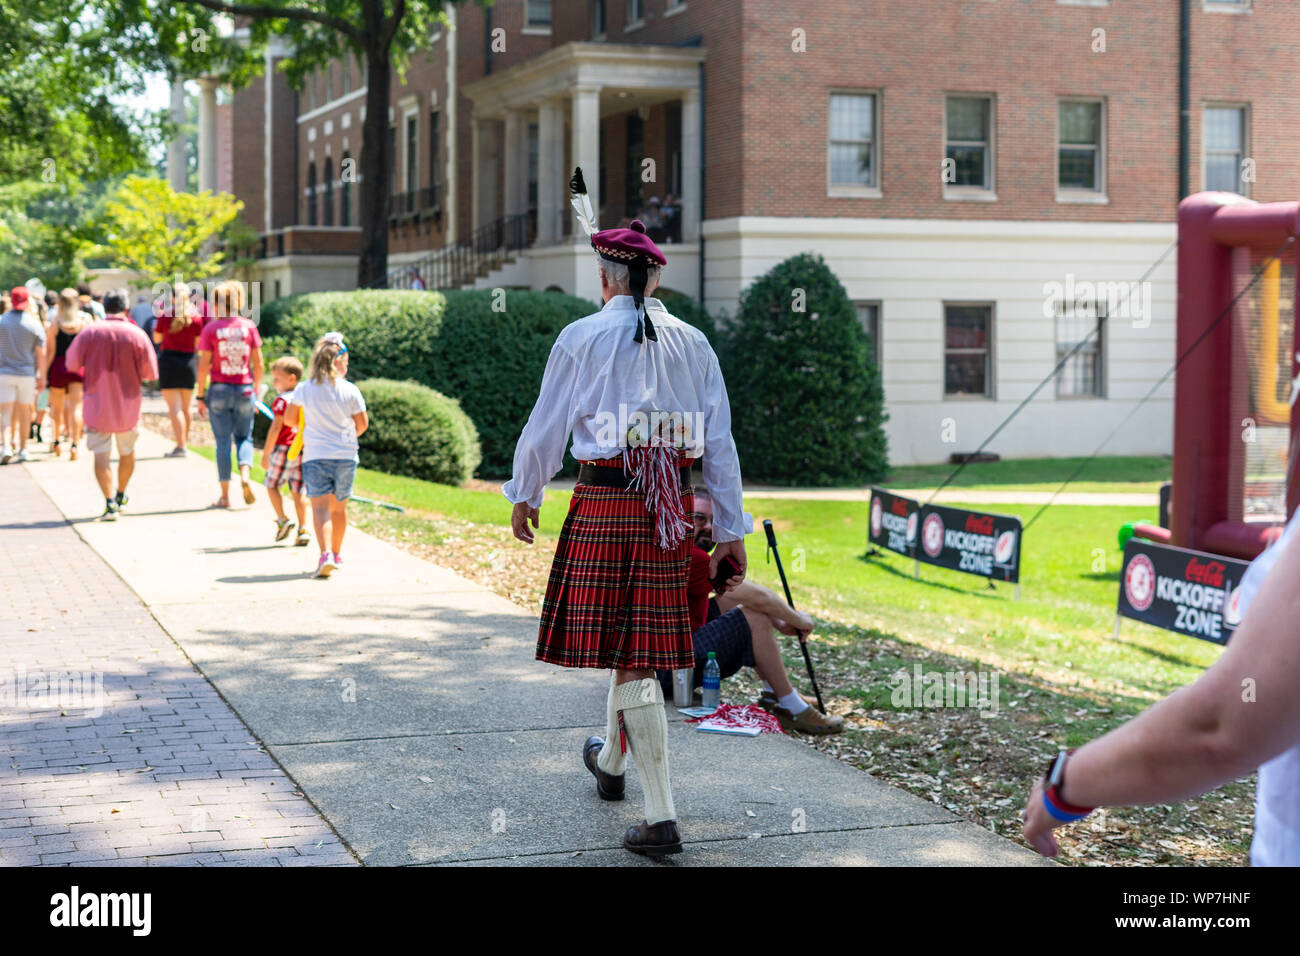 Tuscaloosa, Alabama, USA. 7th Sep, 2019. Alabama fans all have their own unique style. This fellow added a little scottish flair to the crimson and white colors of the University of Alabama. People were in Tuscaloosa, Alabama on Saturday, September 7th, 2019 for the Alabama vs New Mexico game. (Credit Image: © Tim ThompsonZUMA Wire) Stock Photo